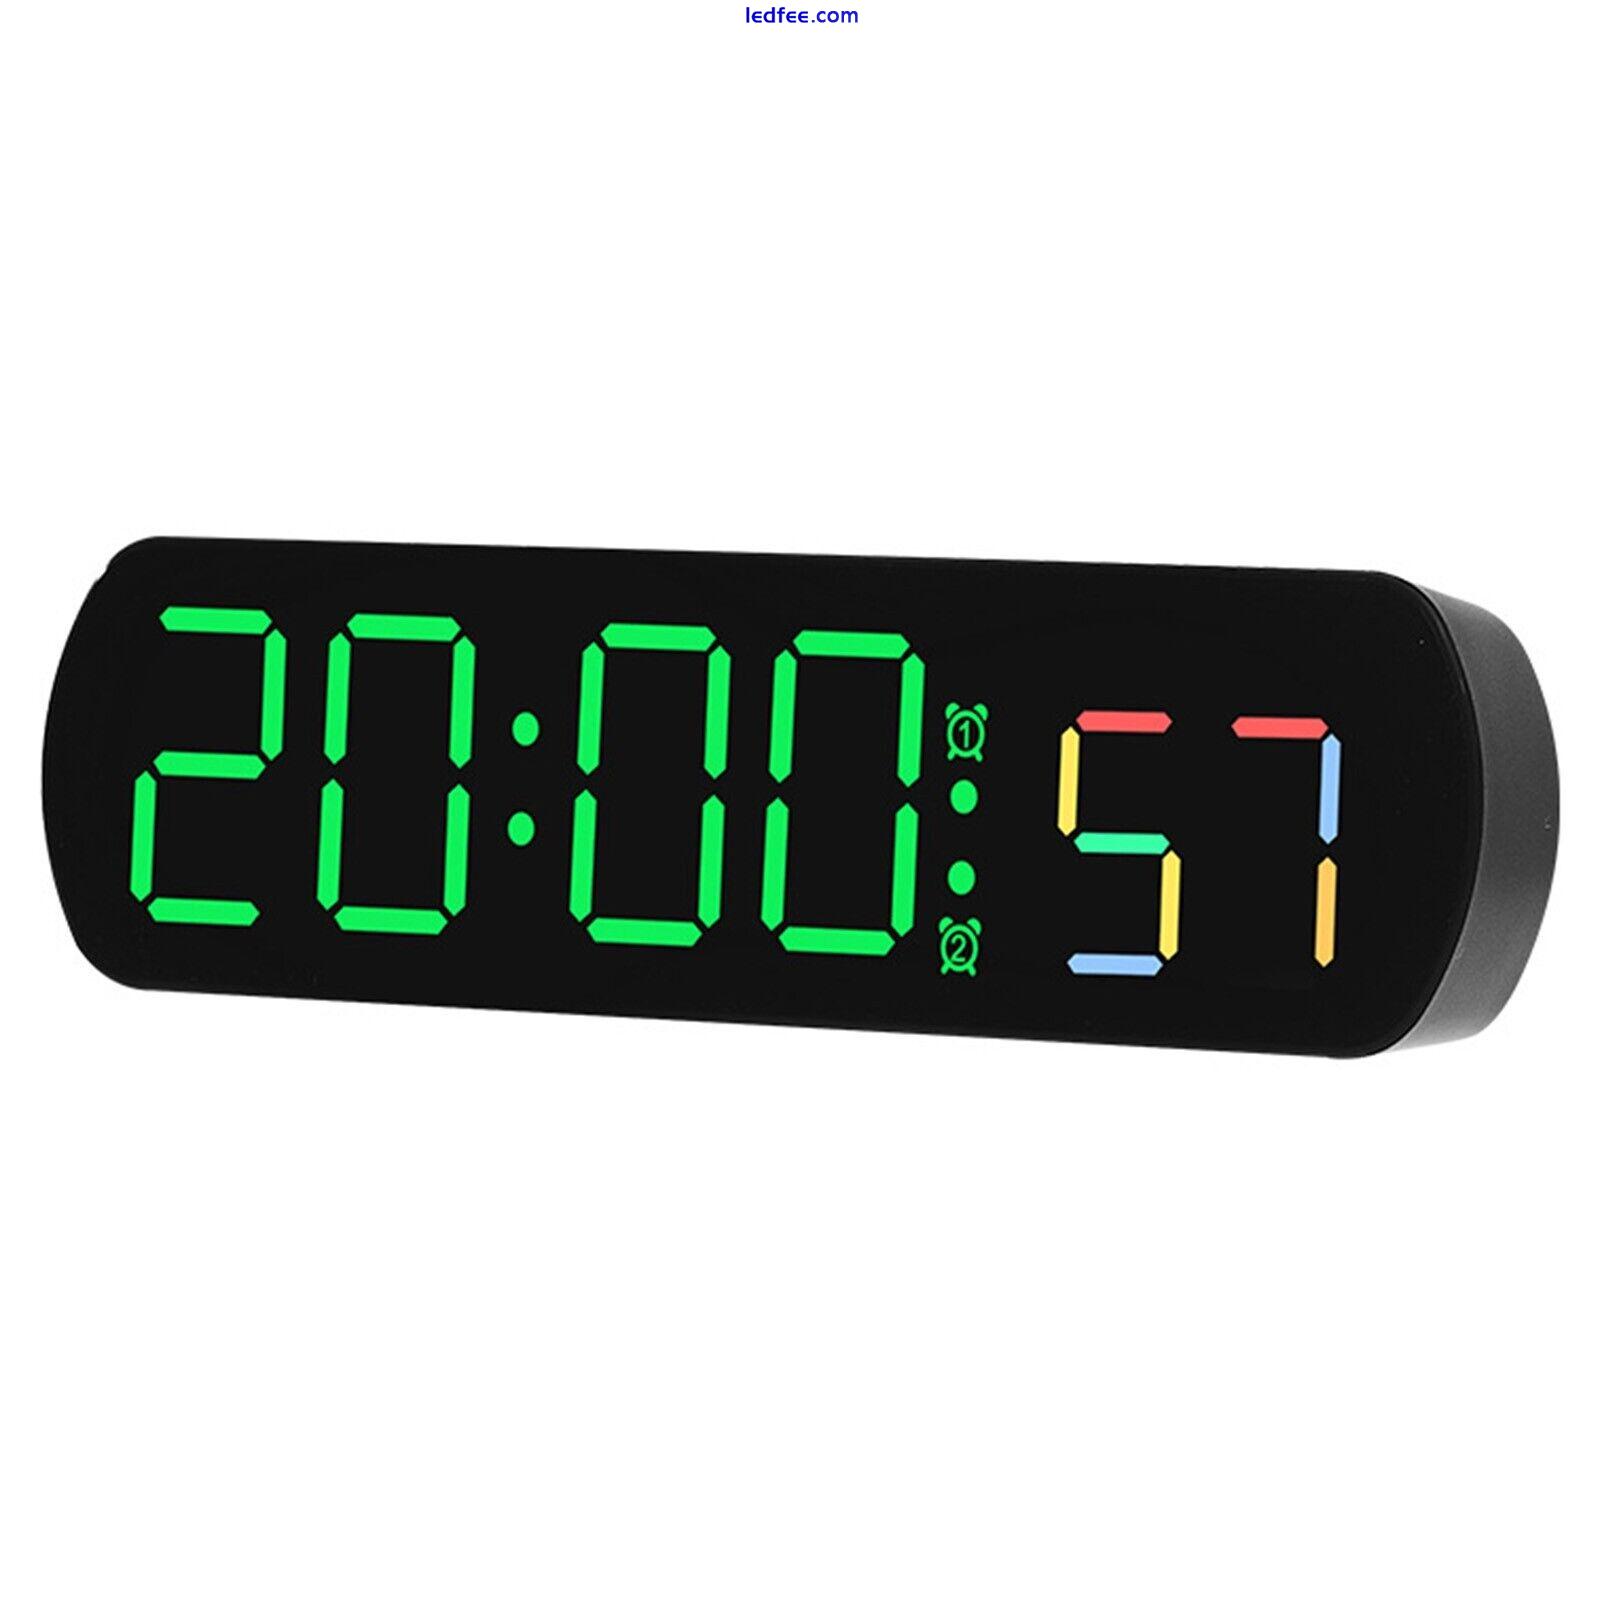 Desktop LED Alarm Clock with Temperature/Humidity Display & Timer Feature 0 